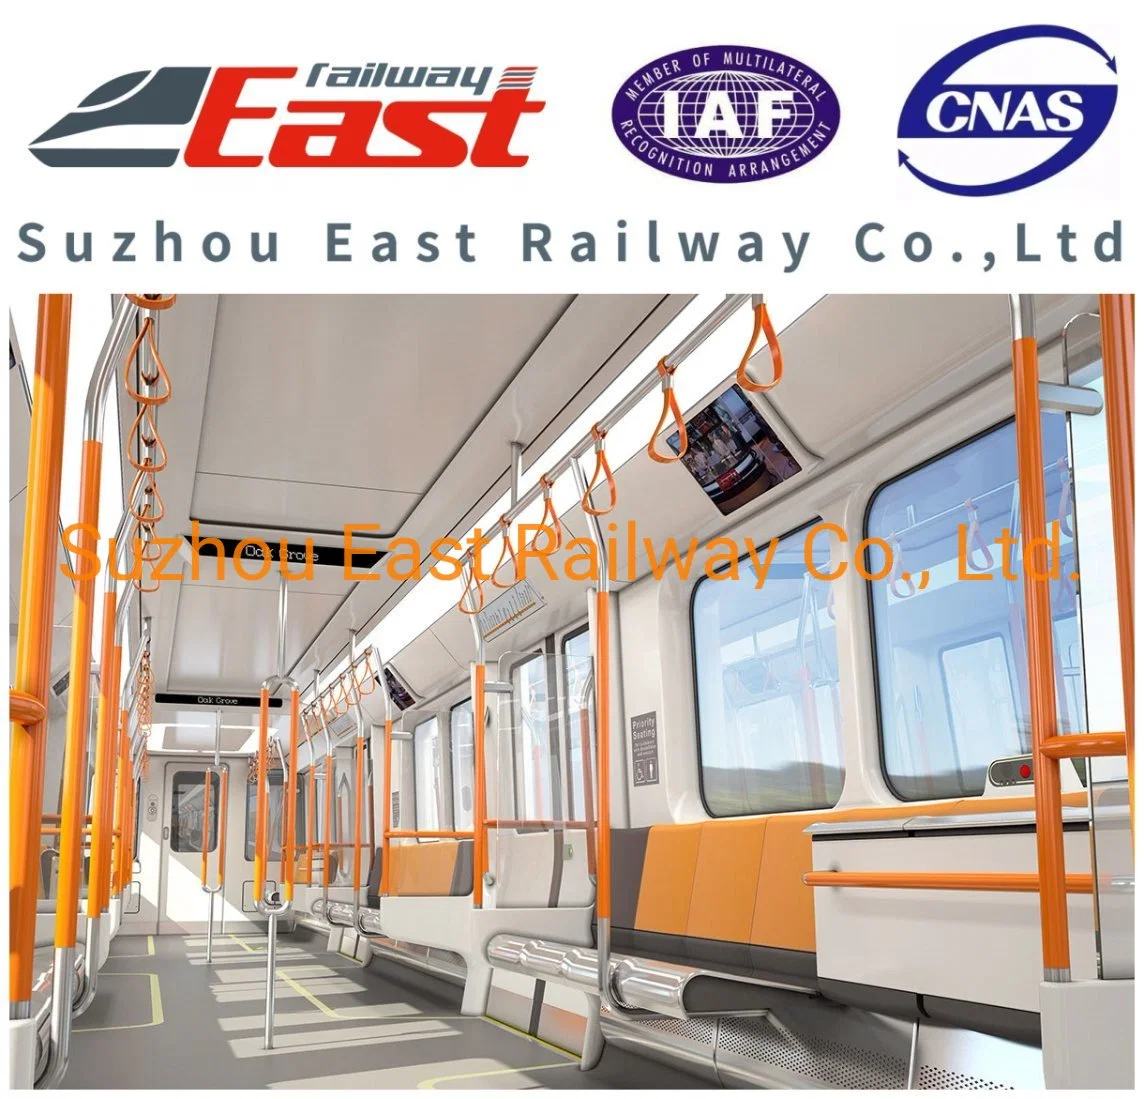 Eastrailway High Quality Railway Passenger Train Interior for Different Function